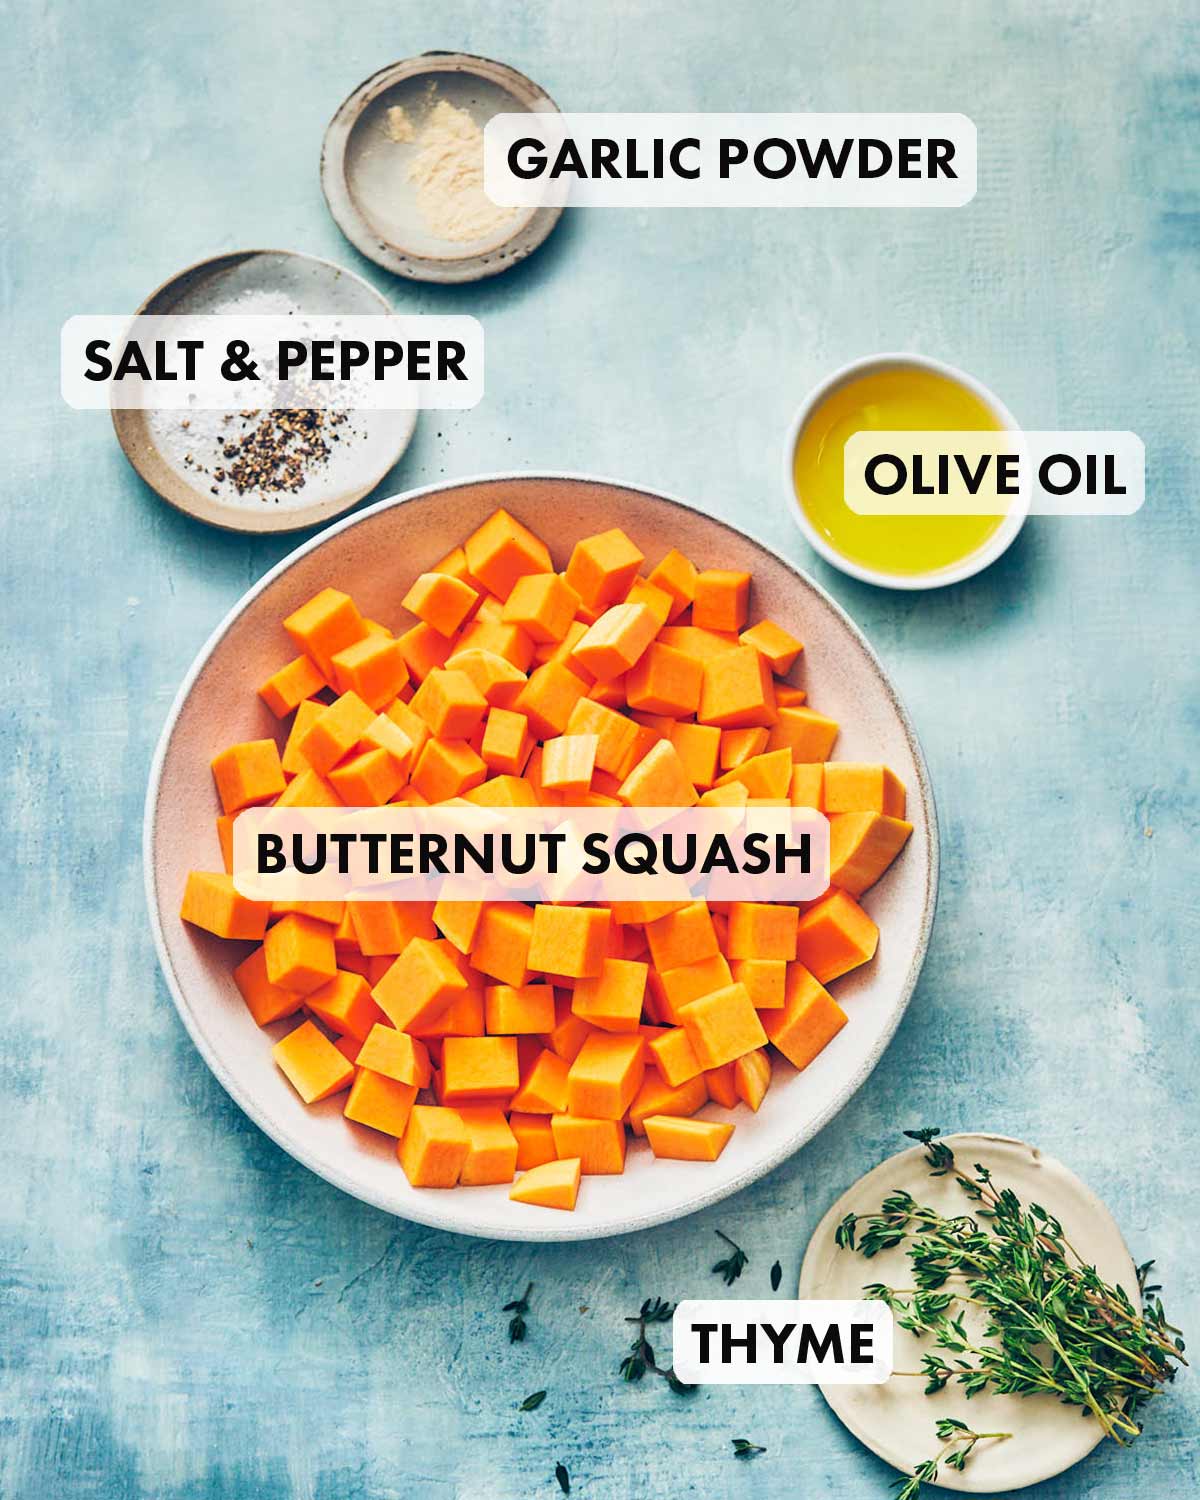 Ingredients to make delicious butternut squash in the air fryer.